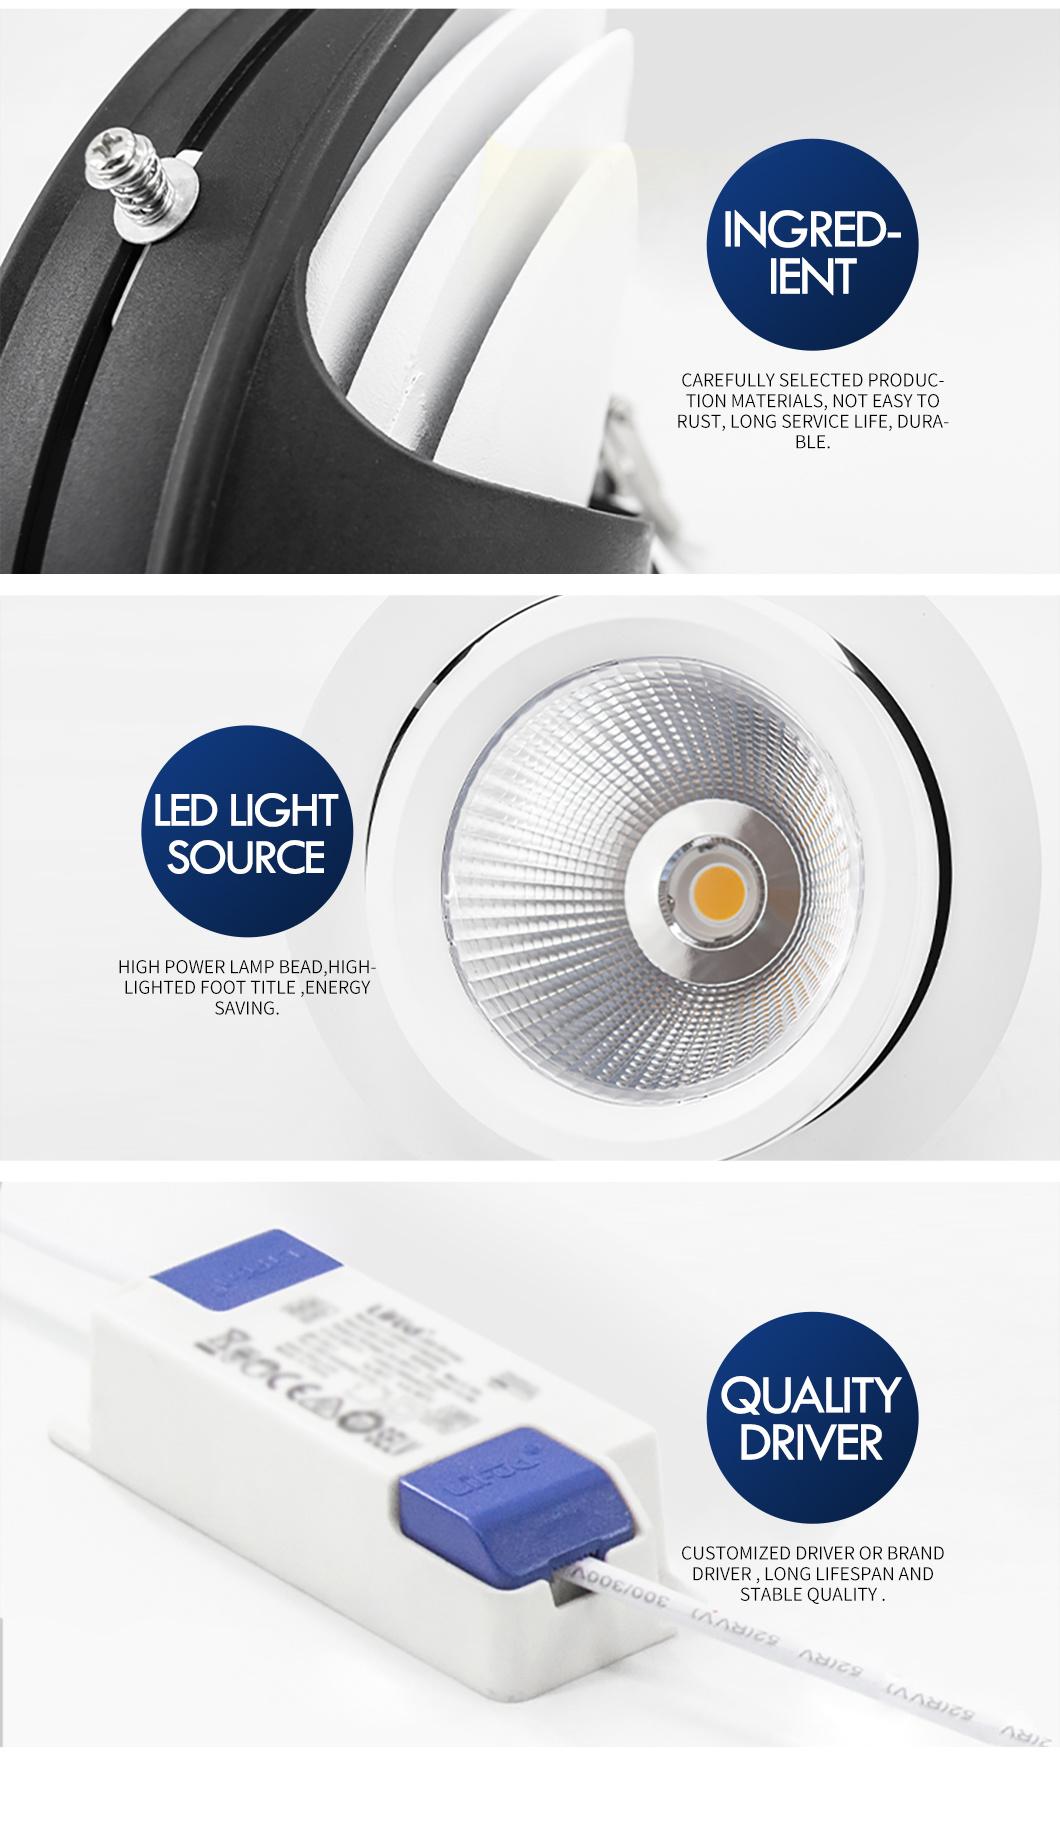 CCT Dimming Color Warm White LED Downlight